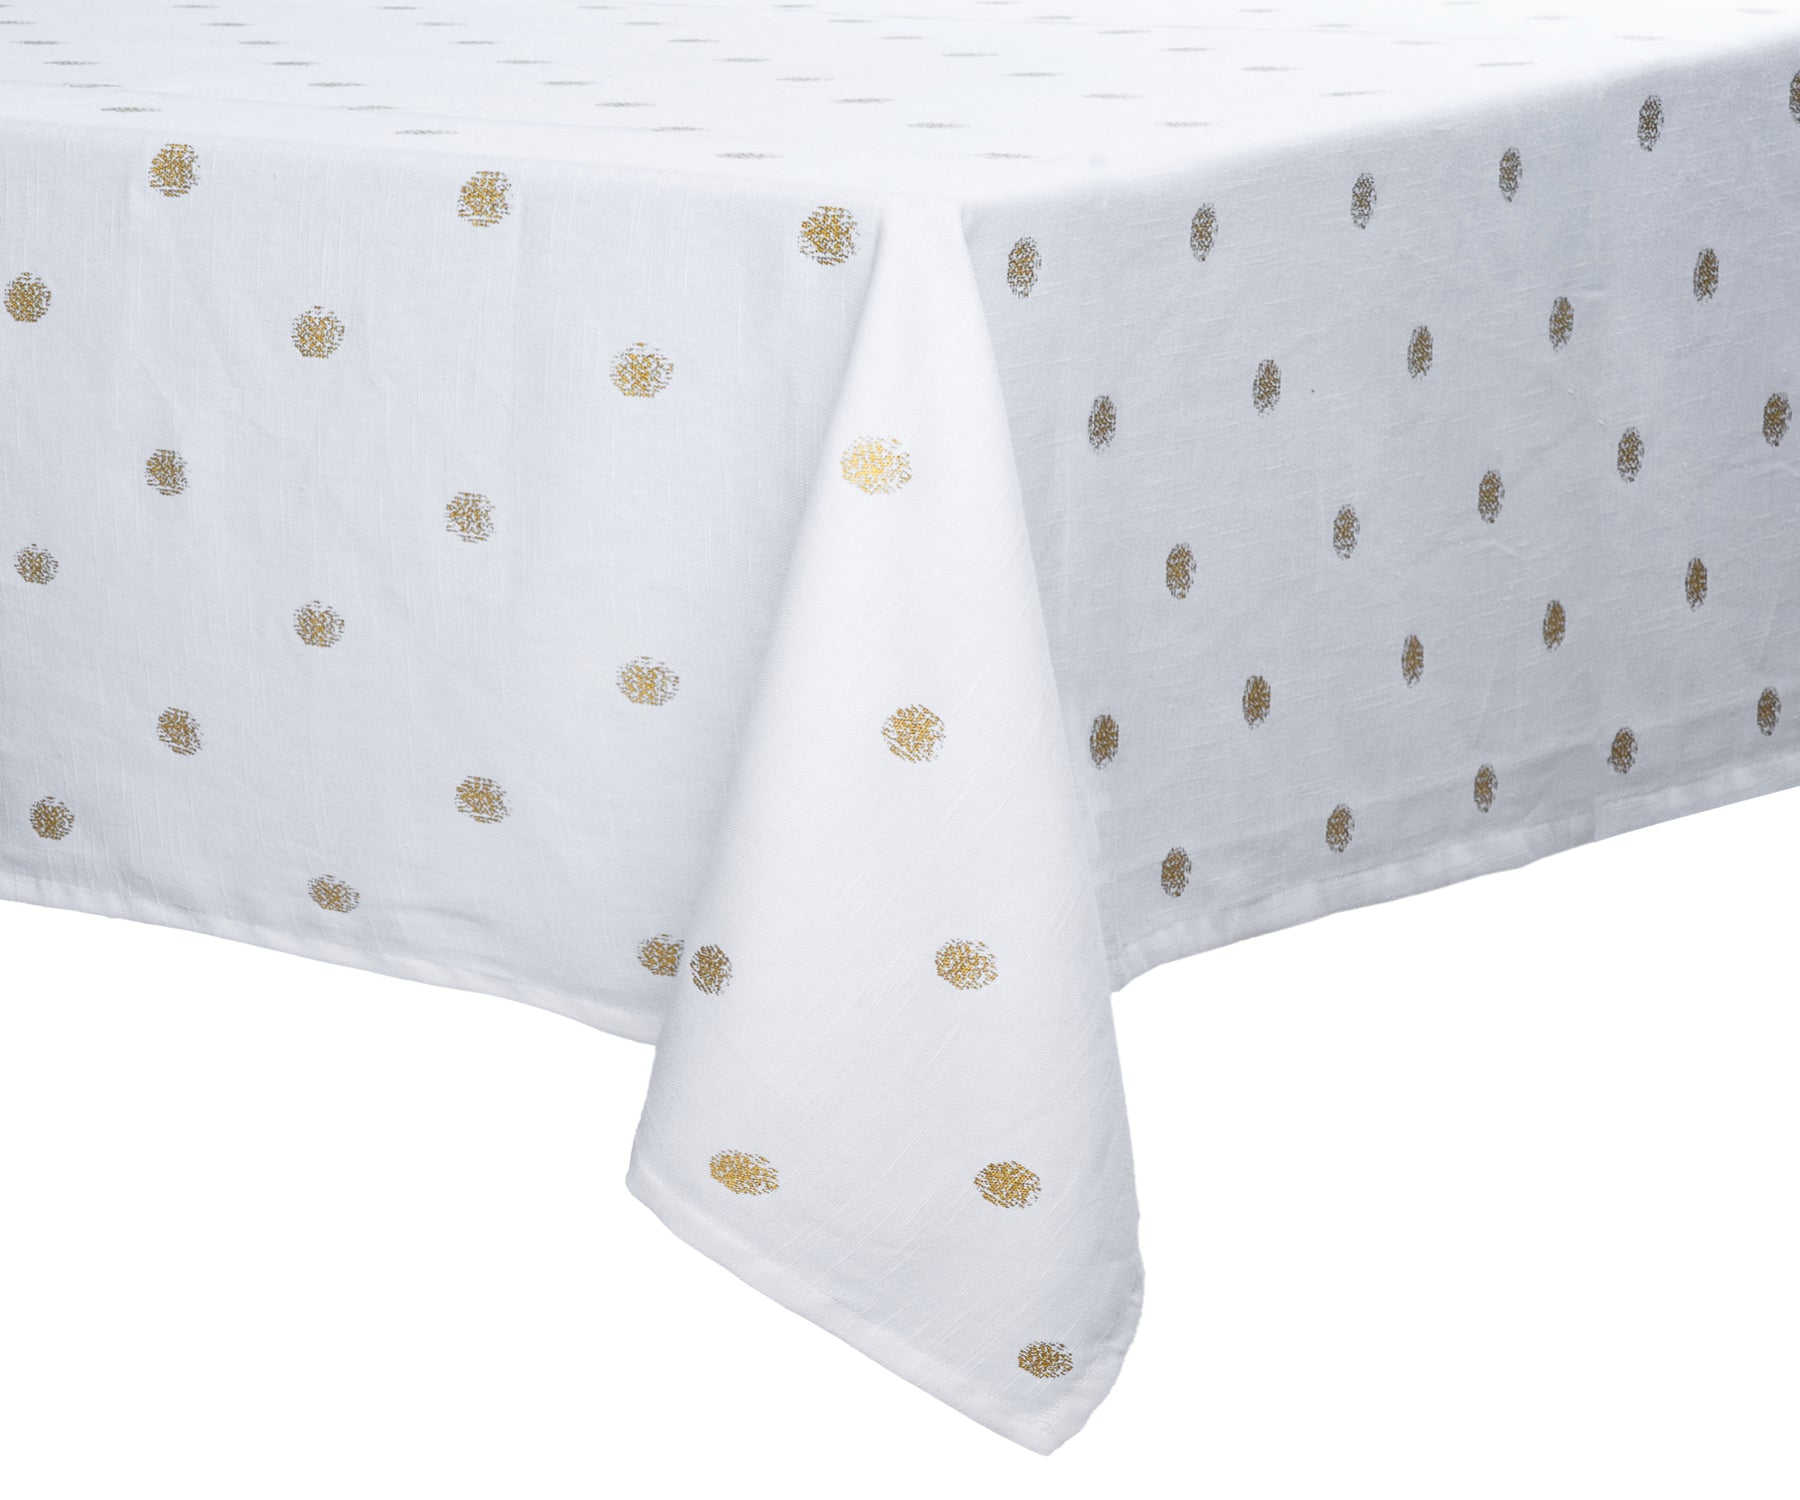 holiday tablecloth, oblong tablecloths, rectangle tablecloth sizes, printed tablecloth.